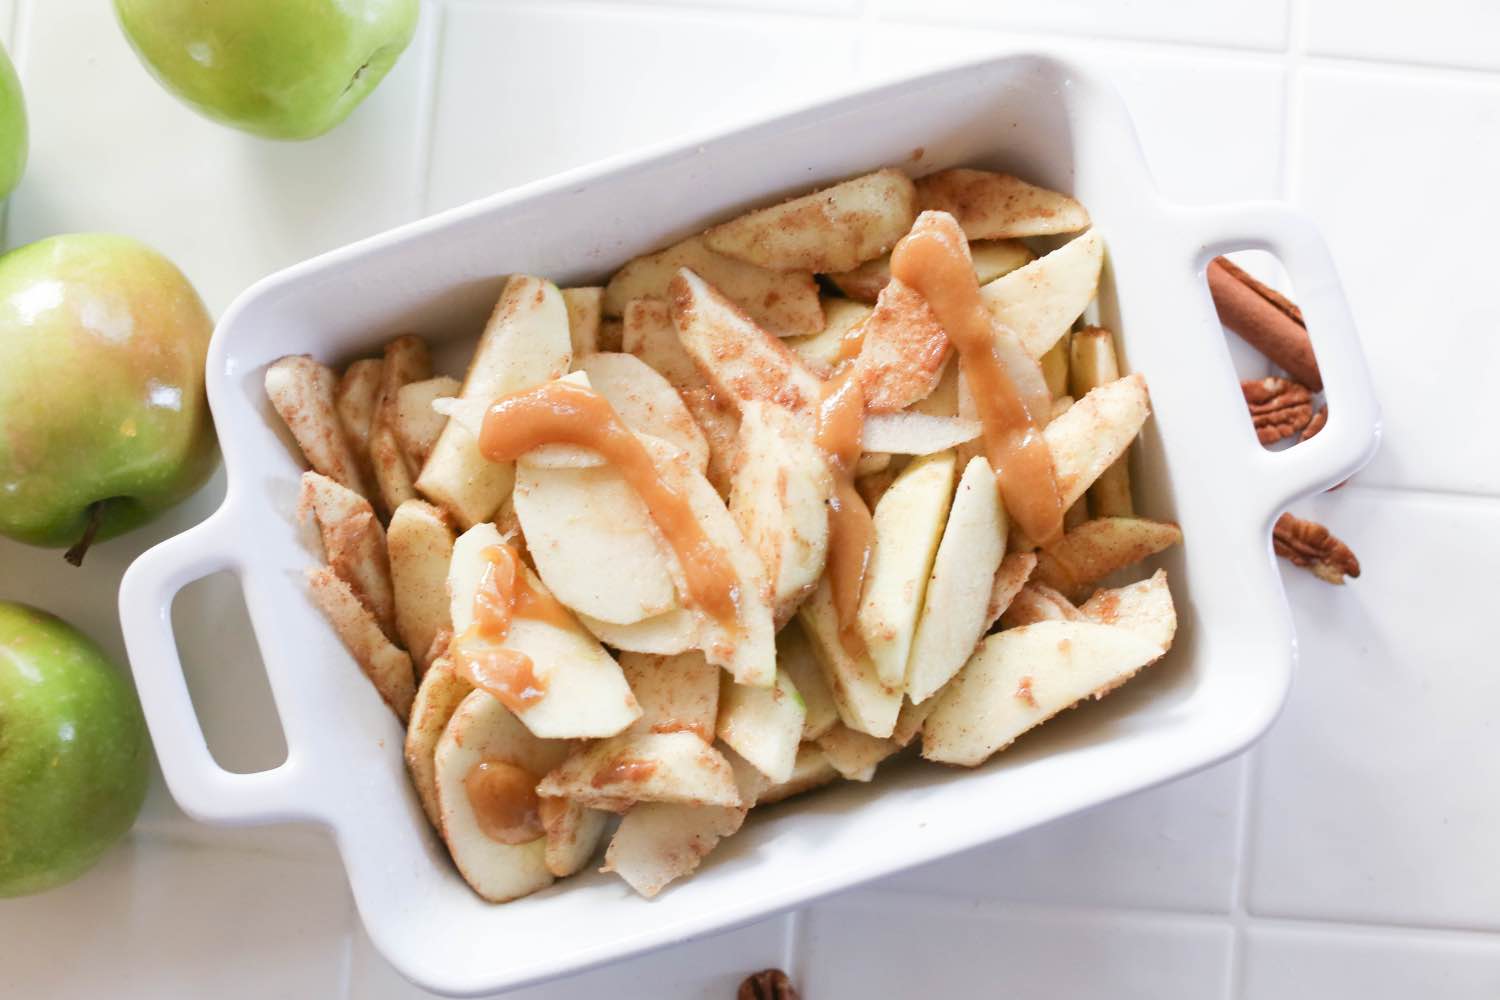 place inside of a baking dish with apples and caramel